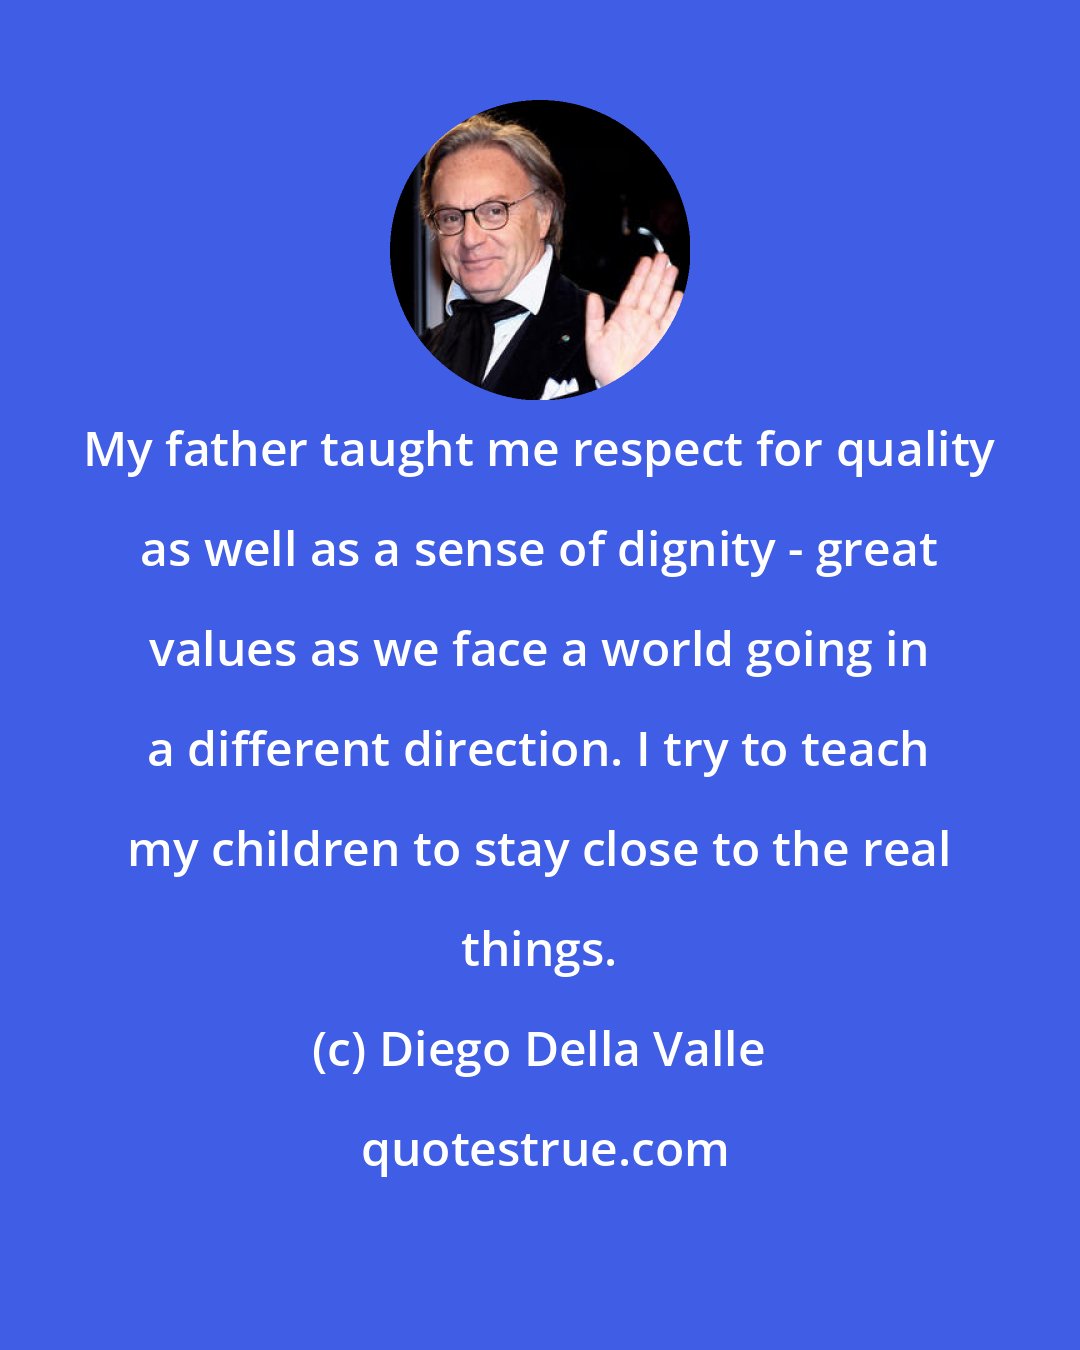 Diego Della Valle: My father taught me respect for quality as well as a sense of dignity - great values as we face a world going in a different direction. I try to teach my children to stay close to the real things.